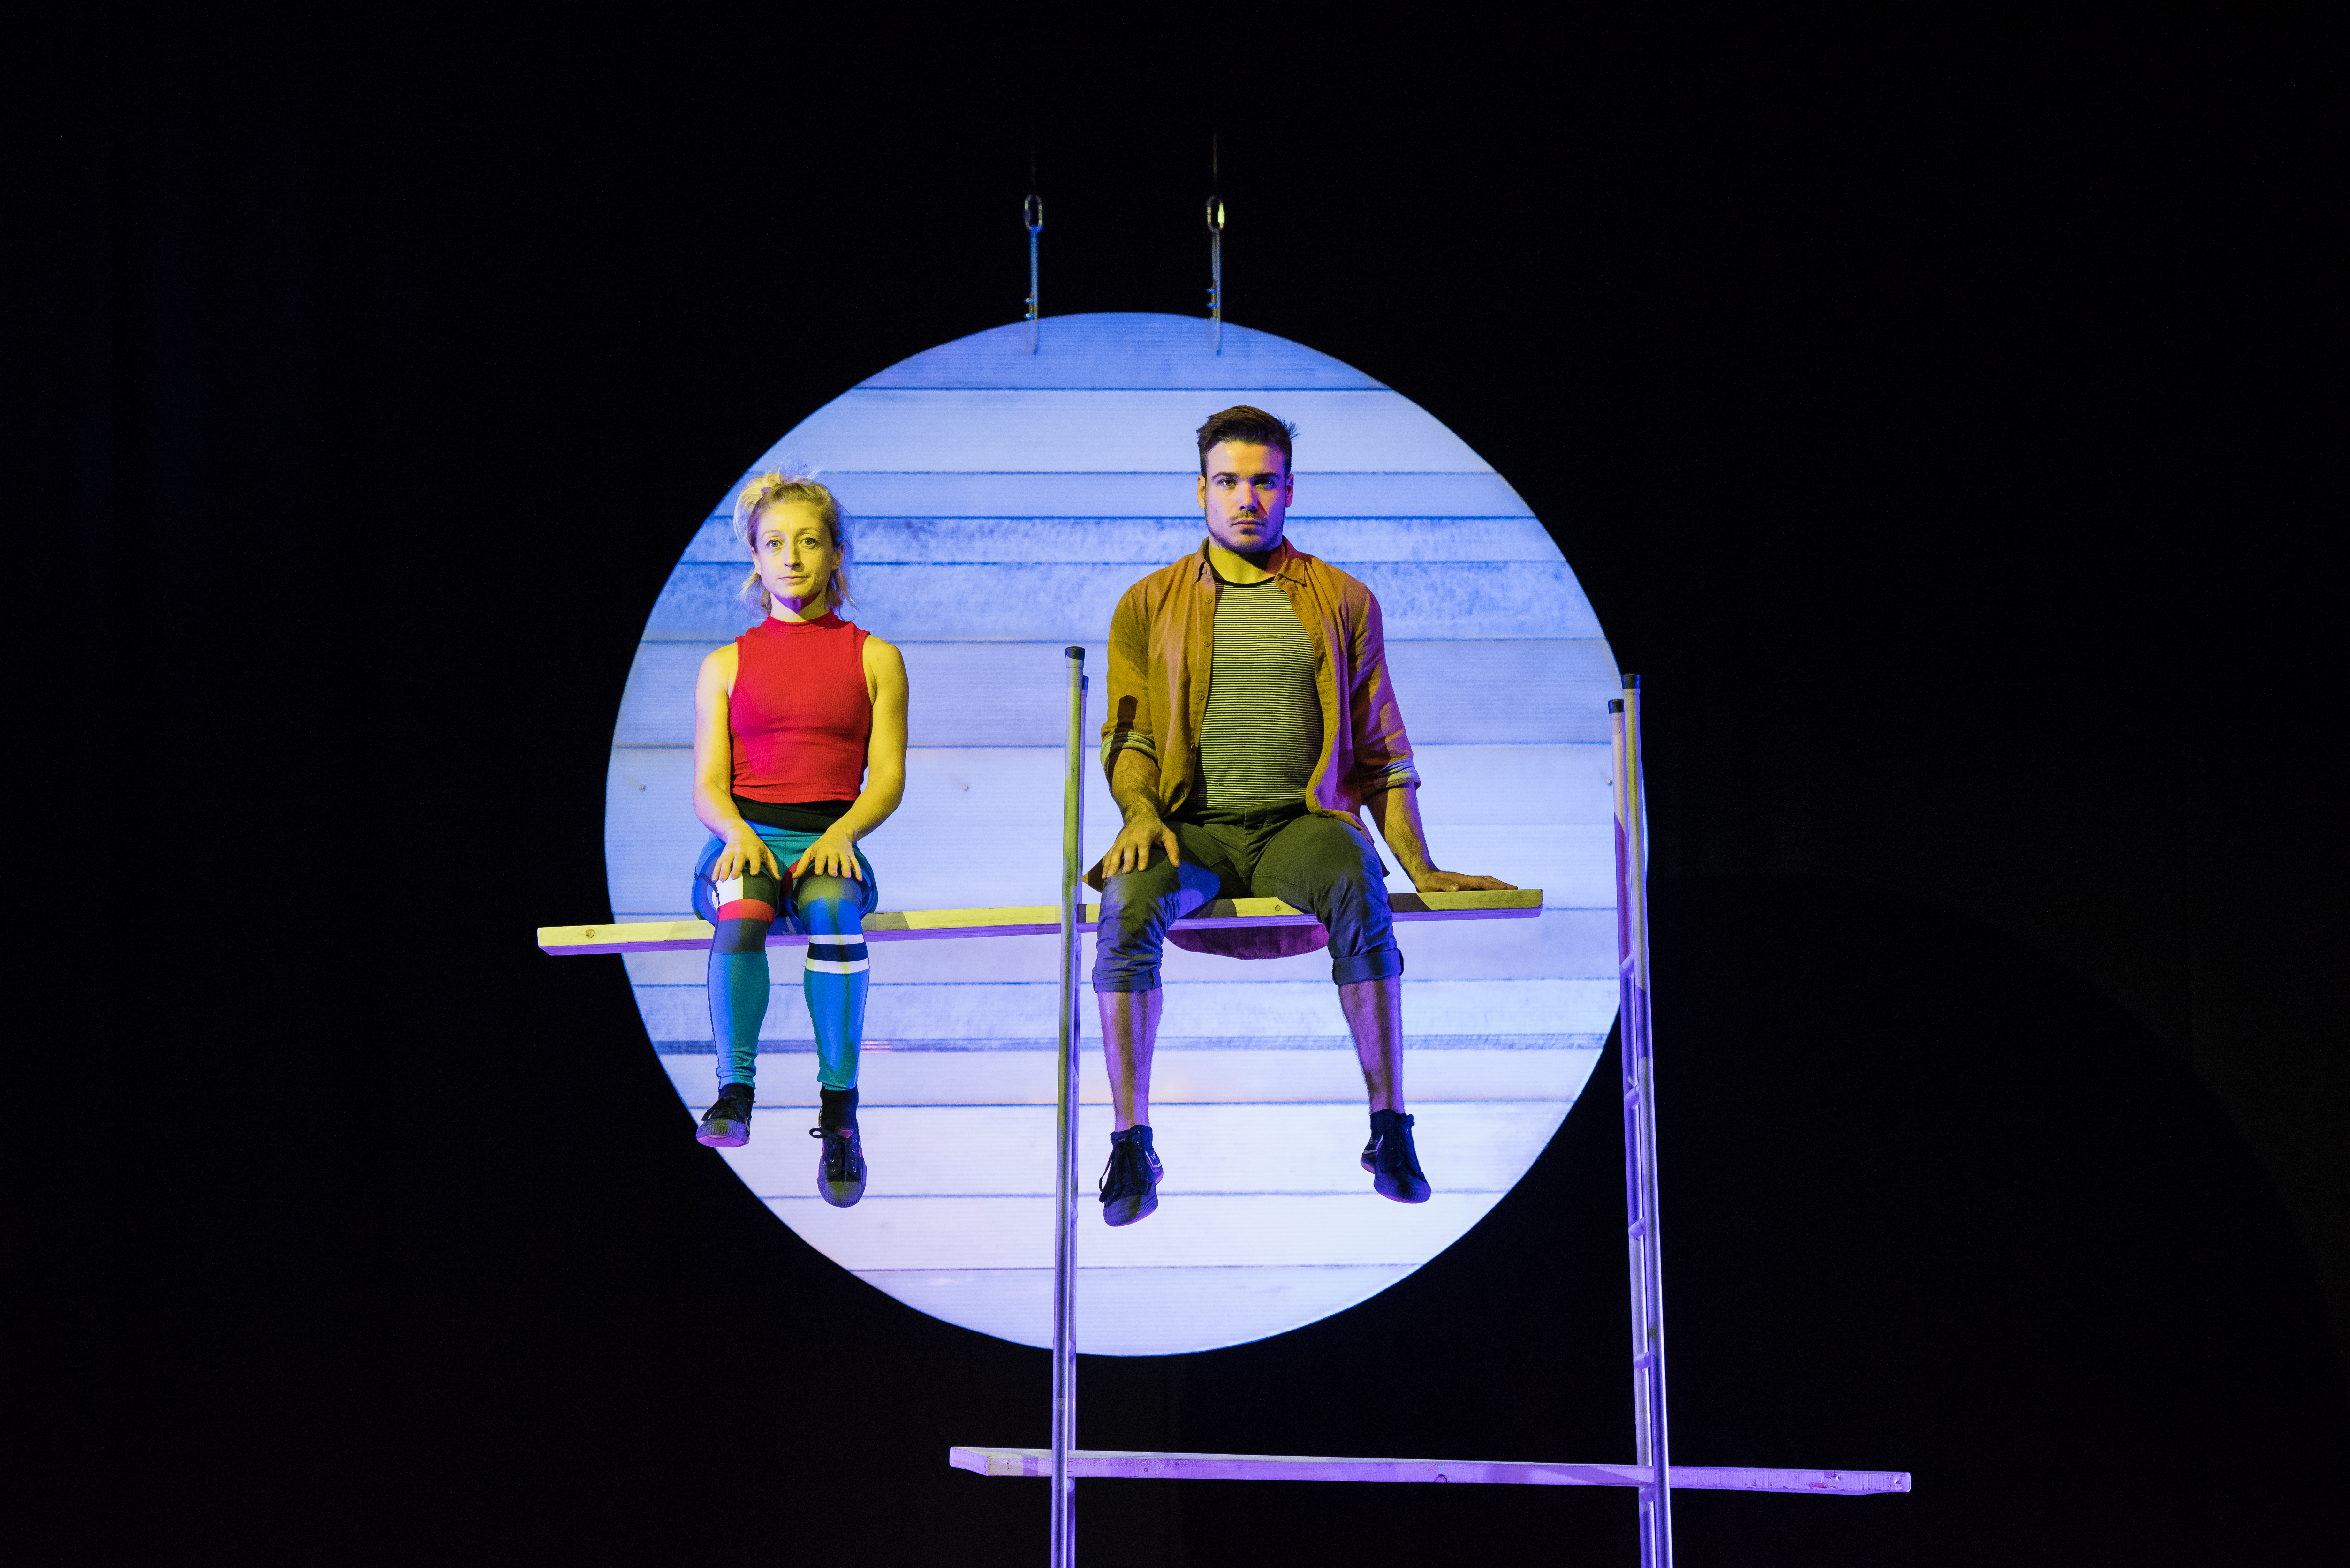 A man and a woman balance on a plank suspended through a ladder, in front of a theatre set of a moon.